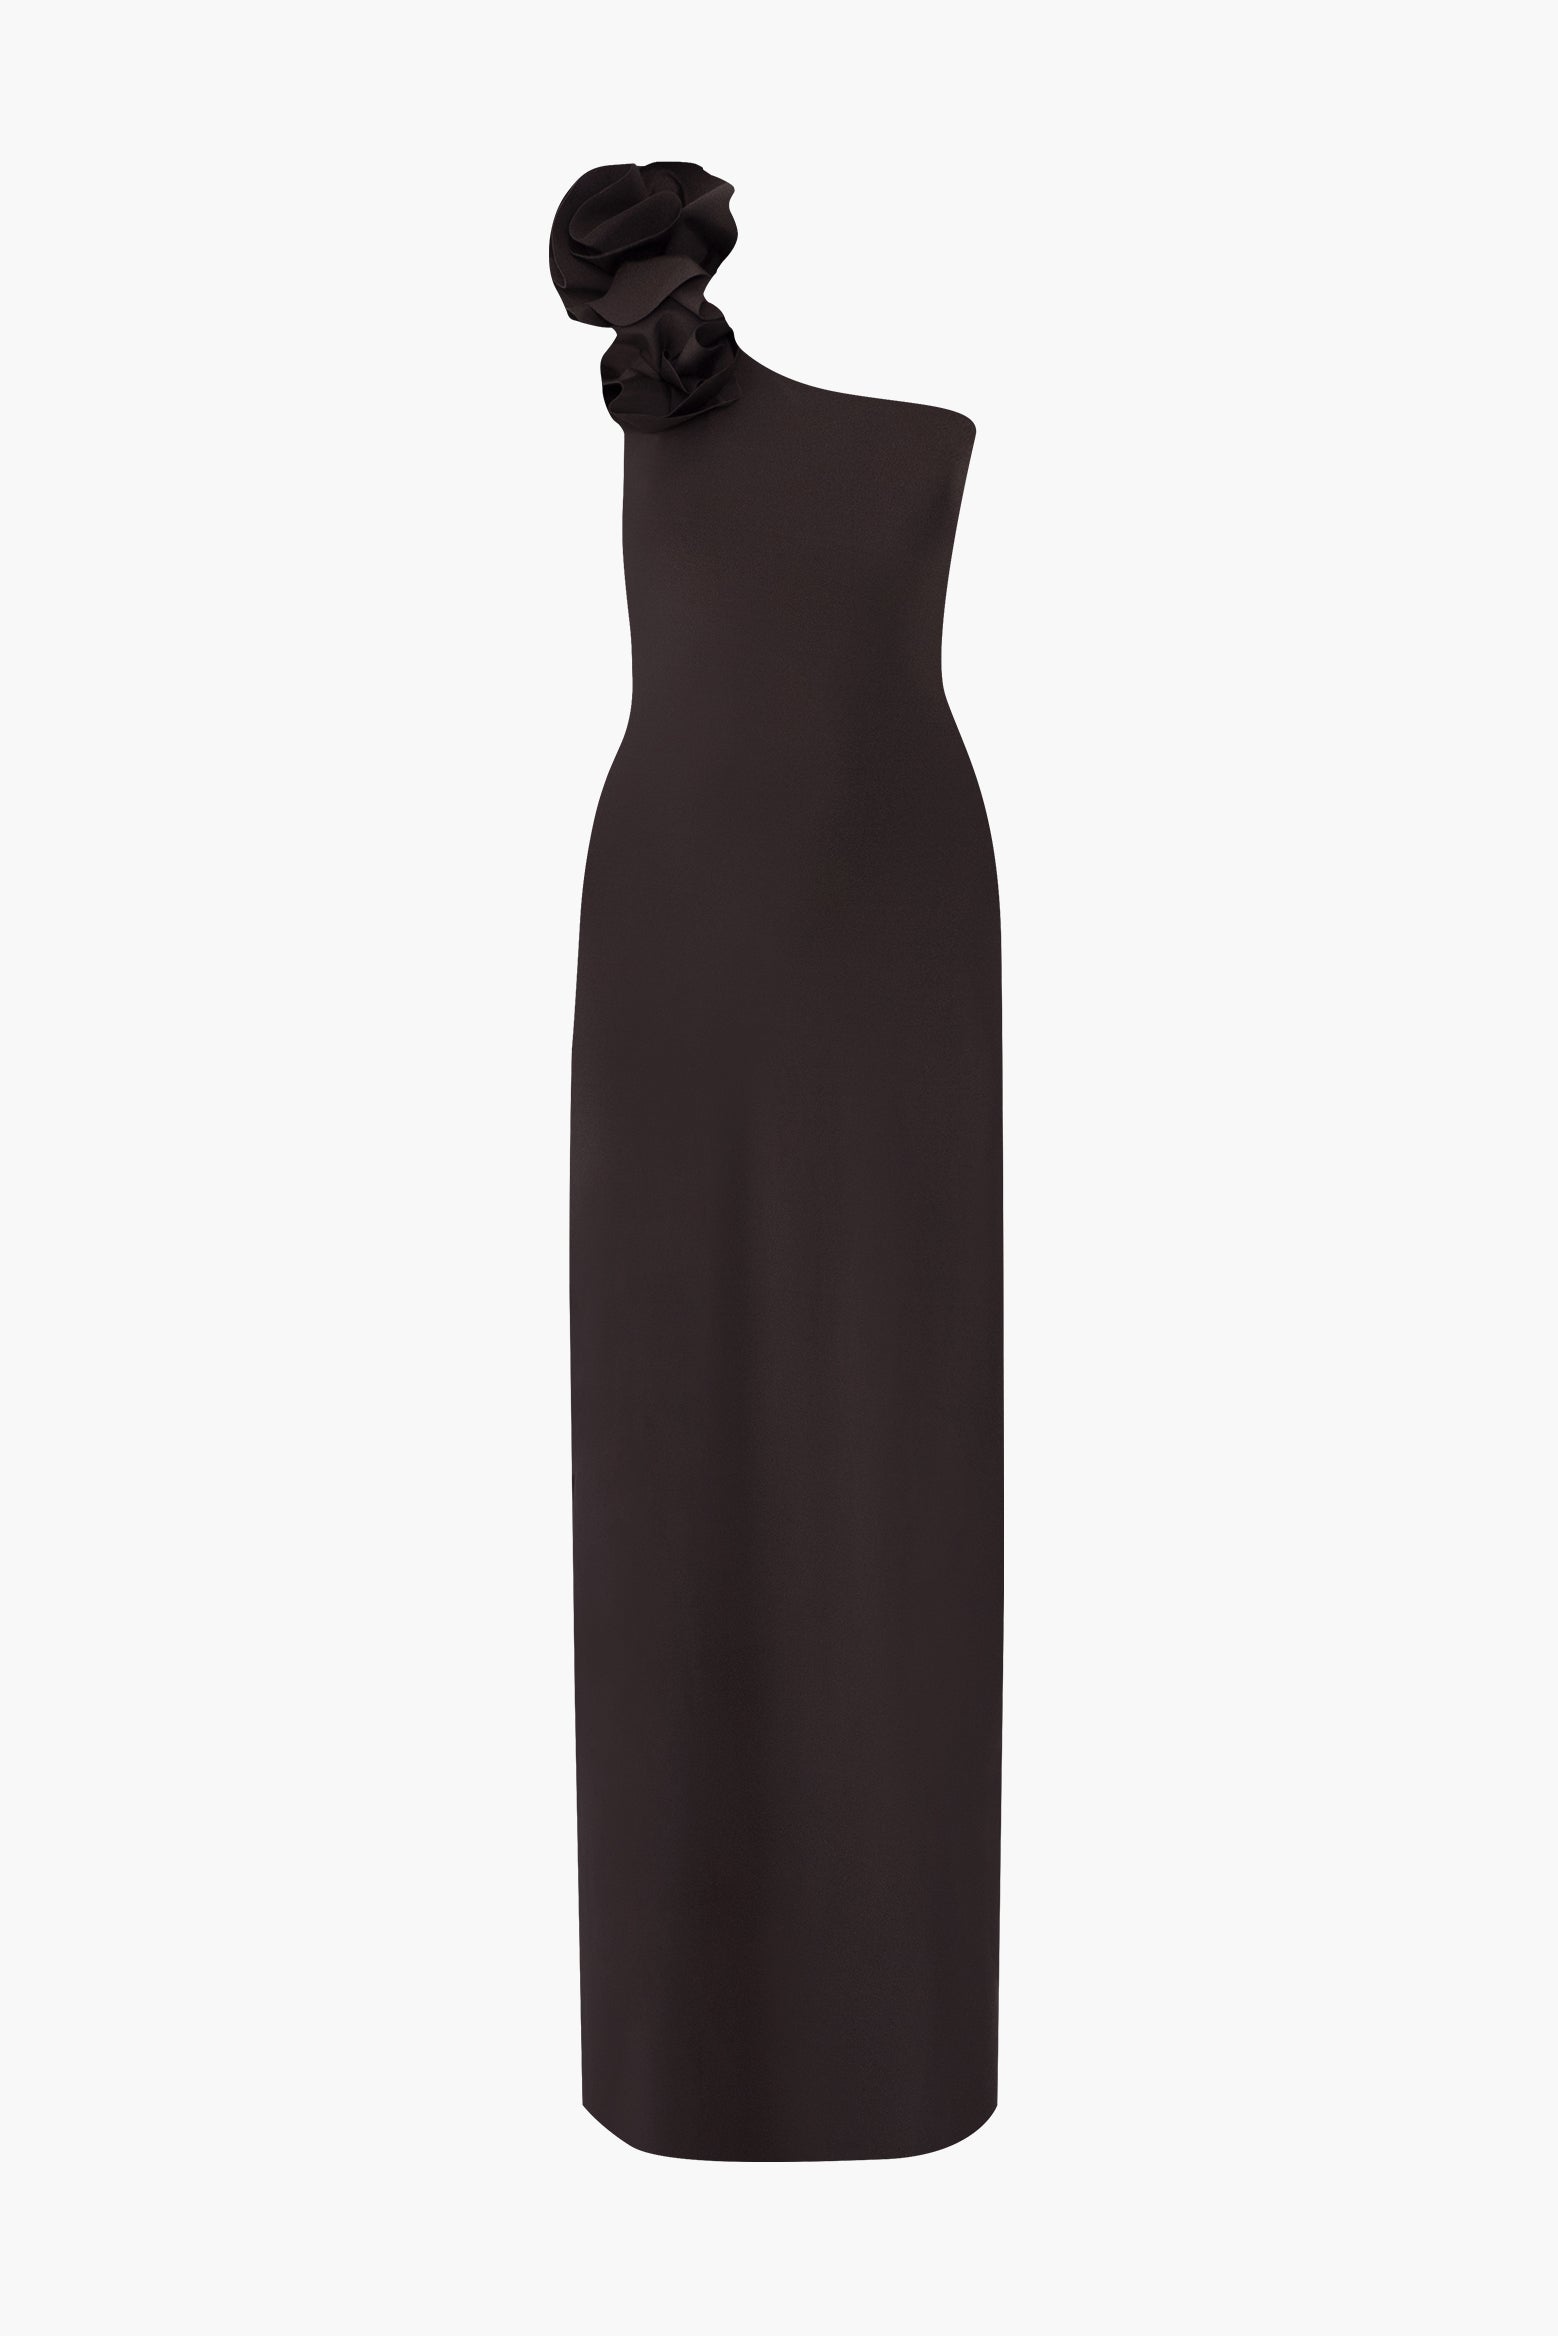 Maygel Coronel Adda Dress in Brown available at The New Trend Australia. 